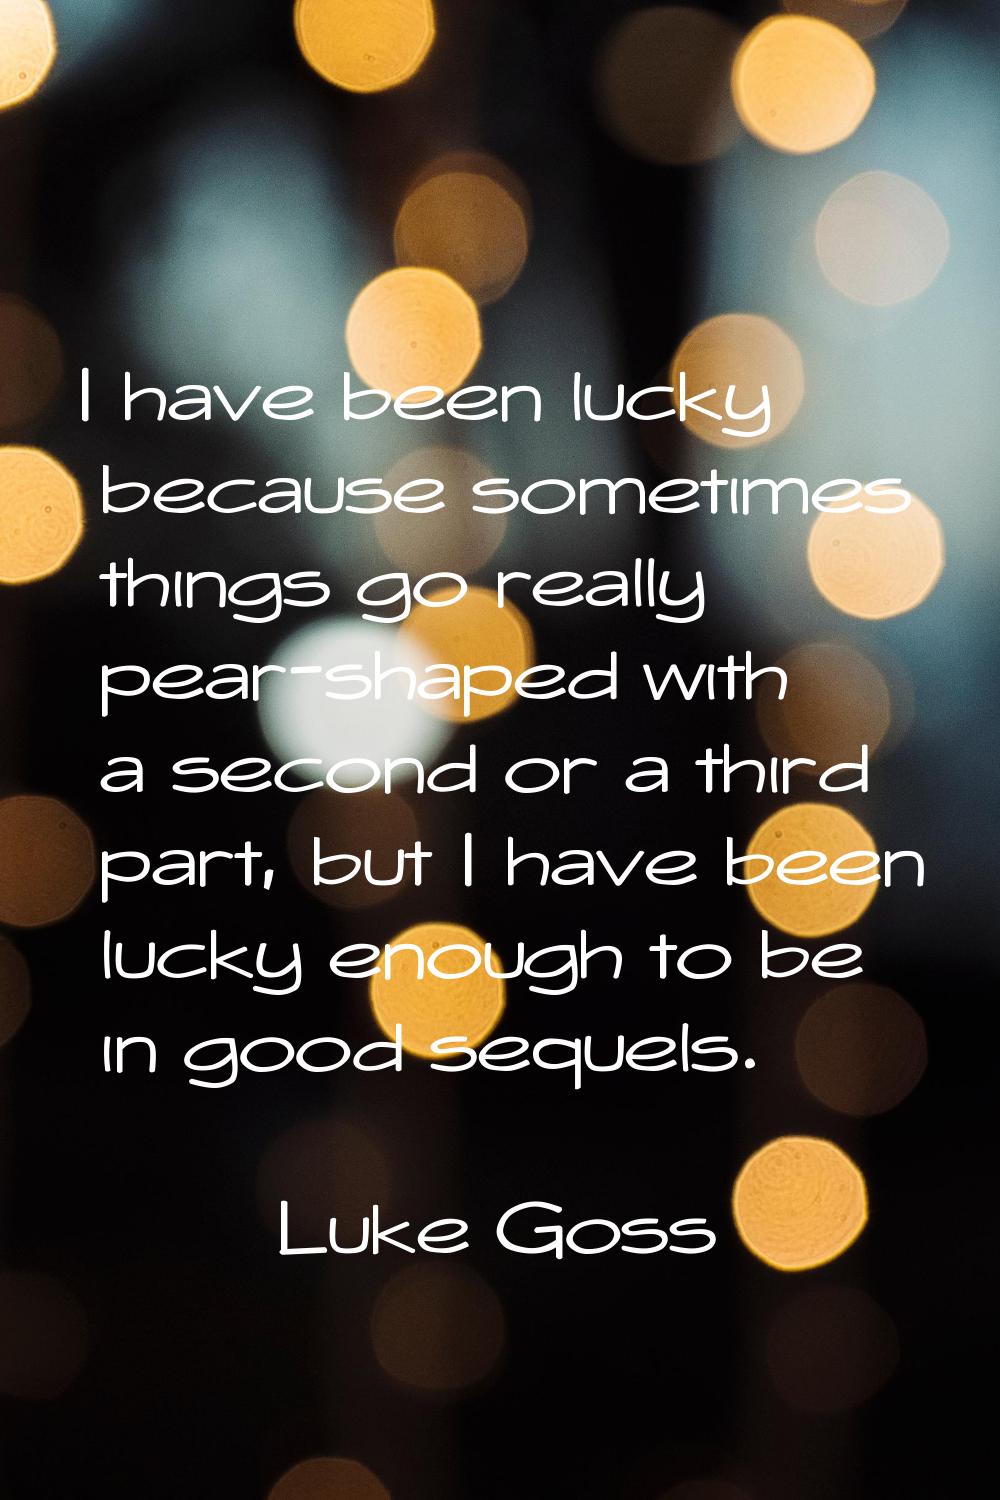 I have been lucky because sometimes things go really pear-shaped with a second or a third part, but